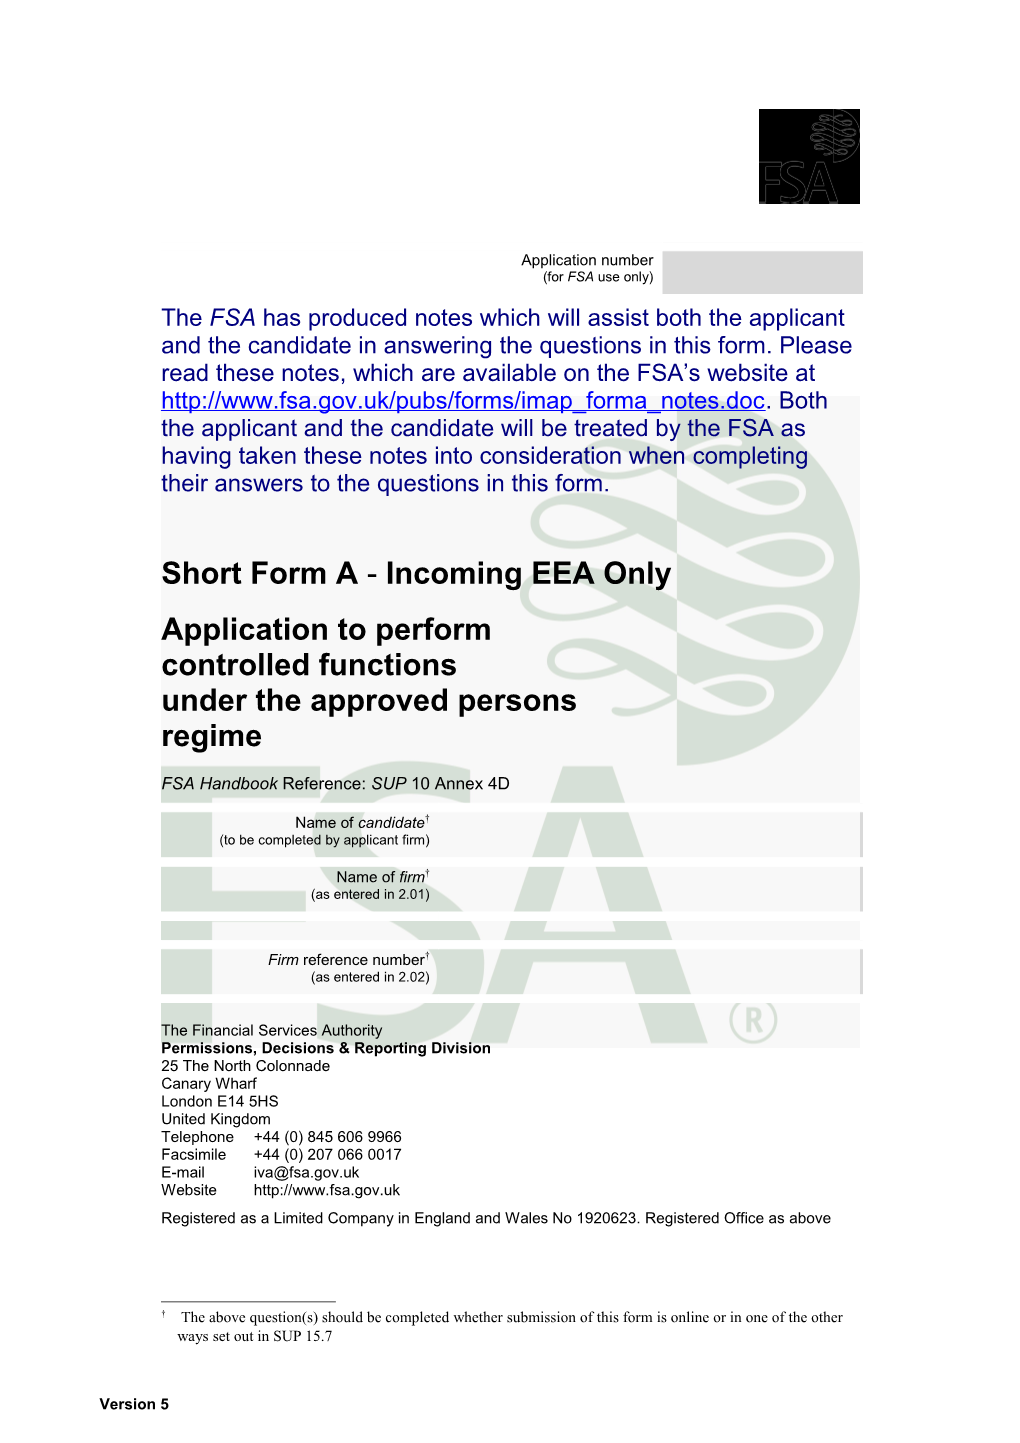 Short Form a - Incoming EEA Only: Application to Perform Controlled Functions Under The